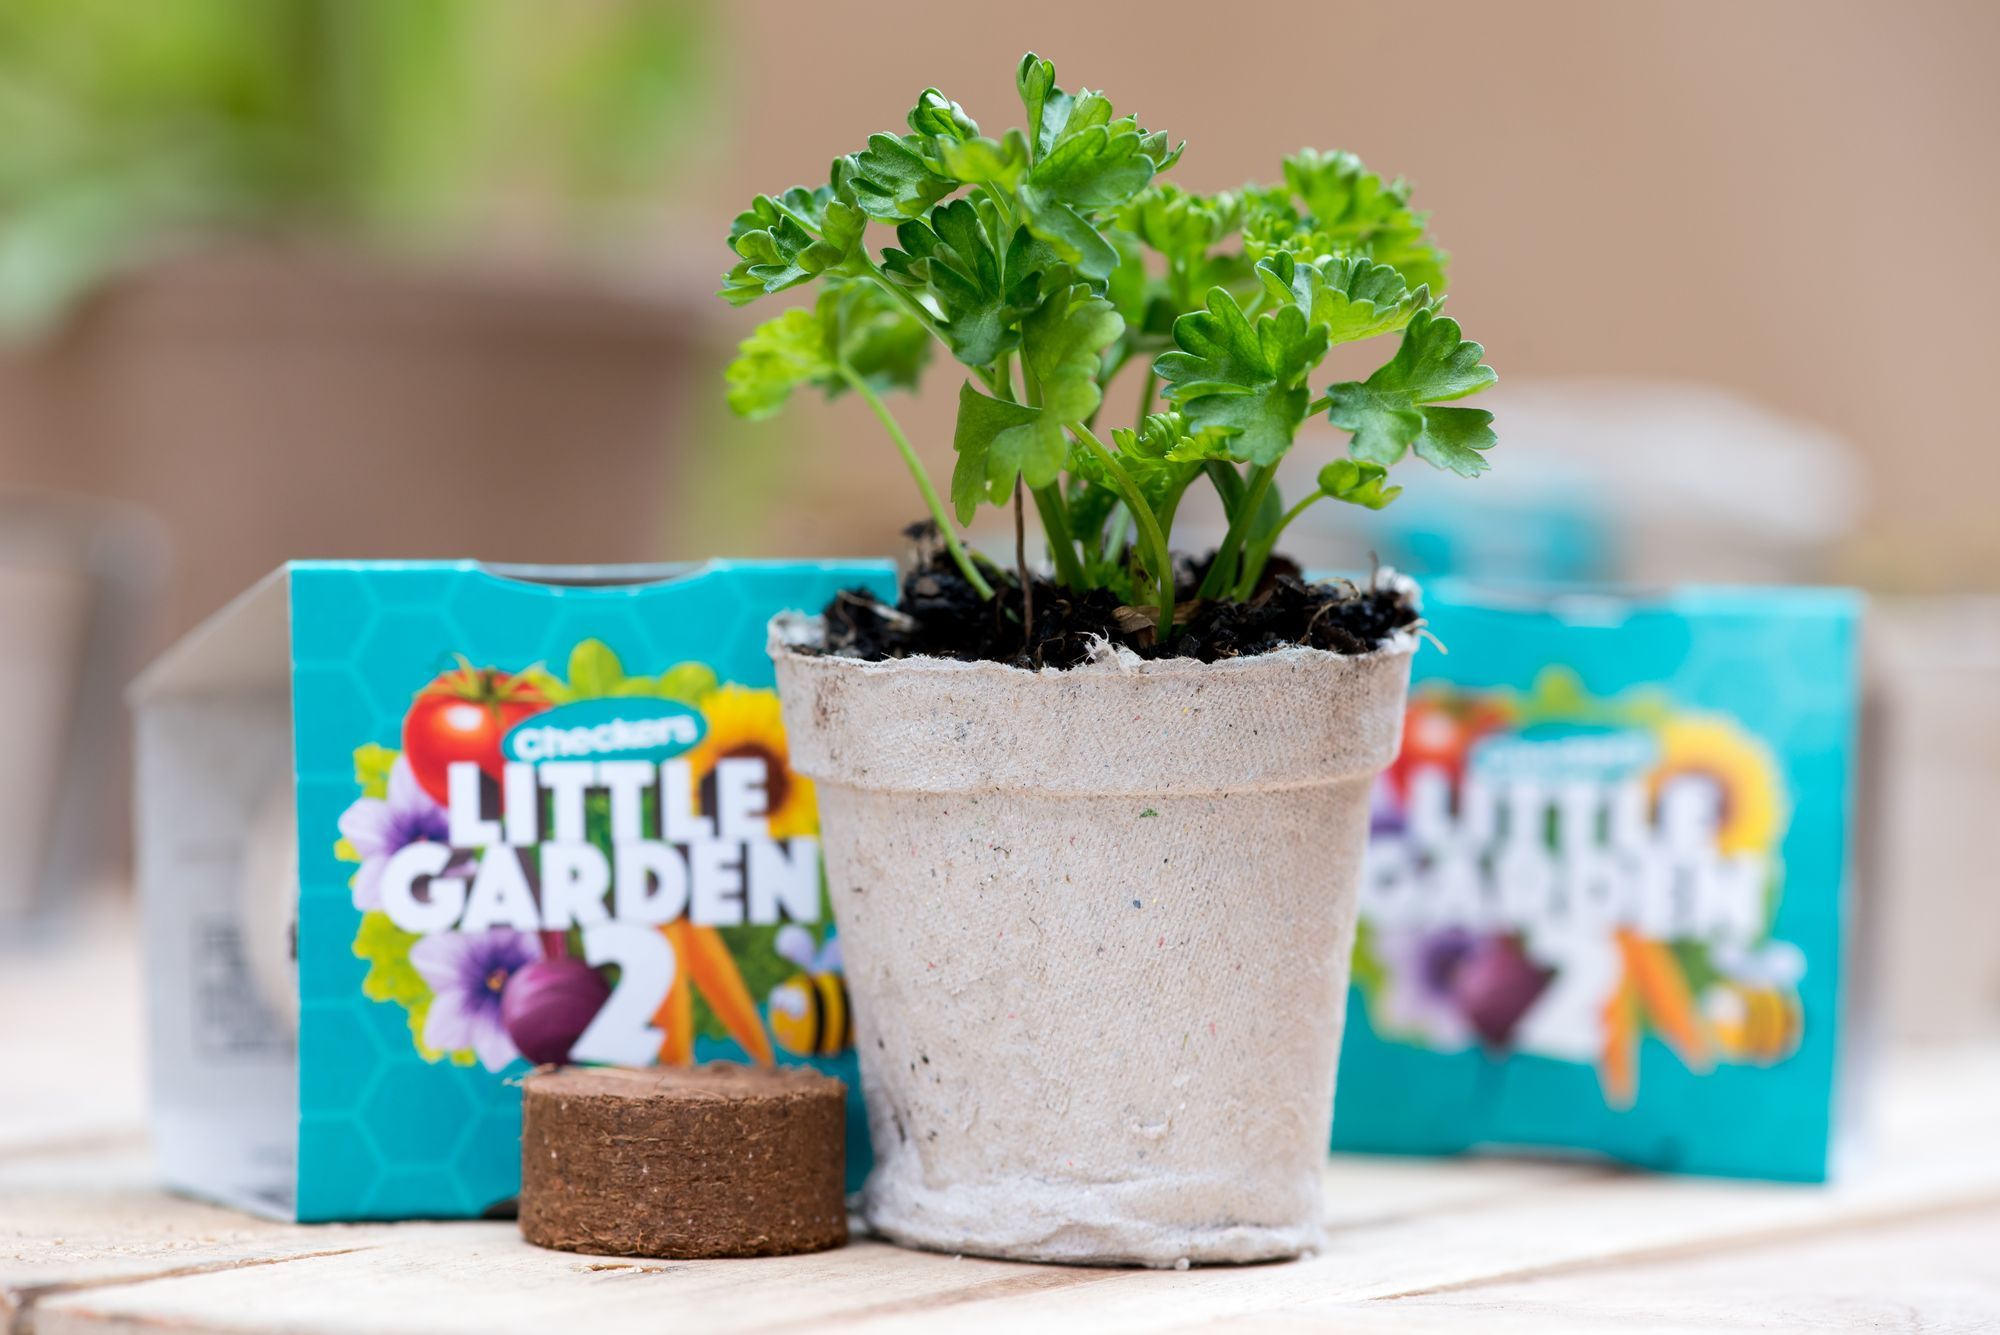 Little Garden is back at Checkers